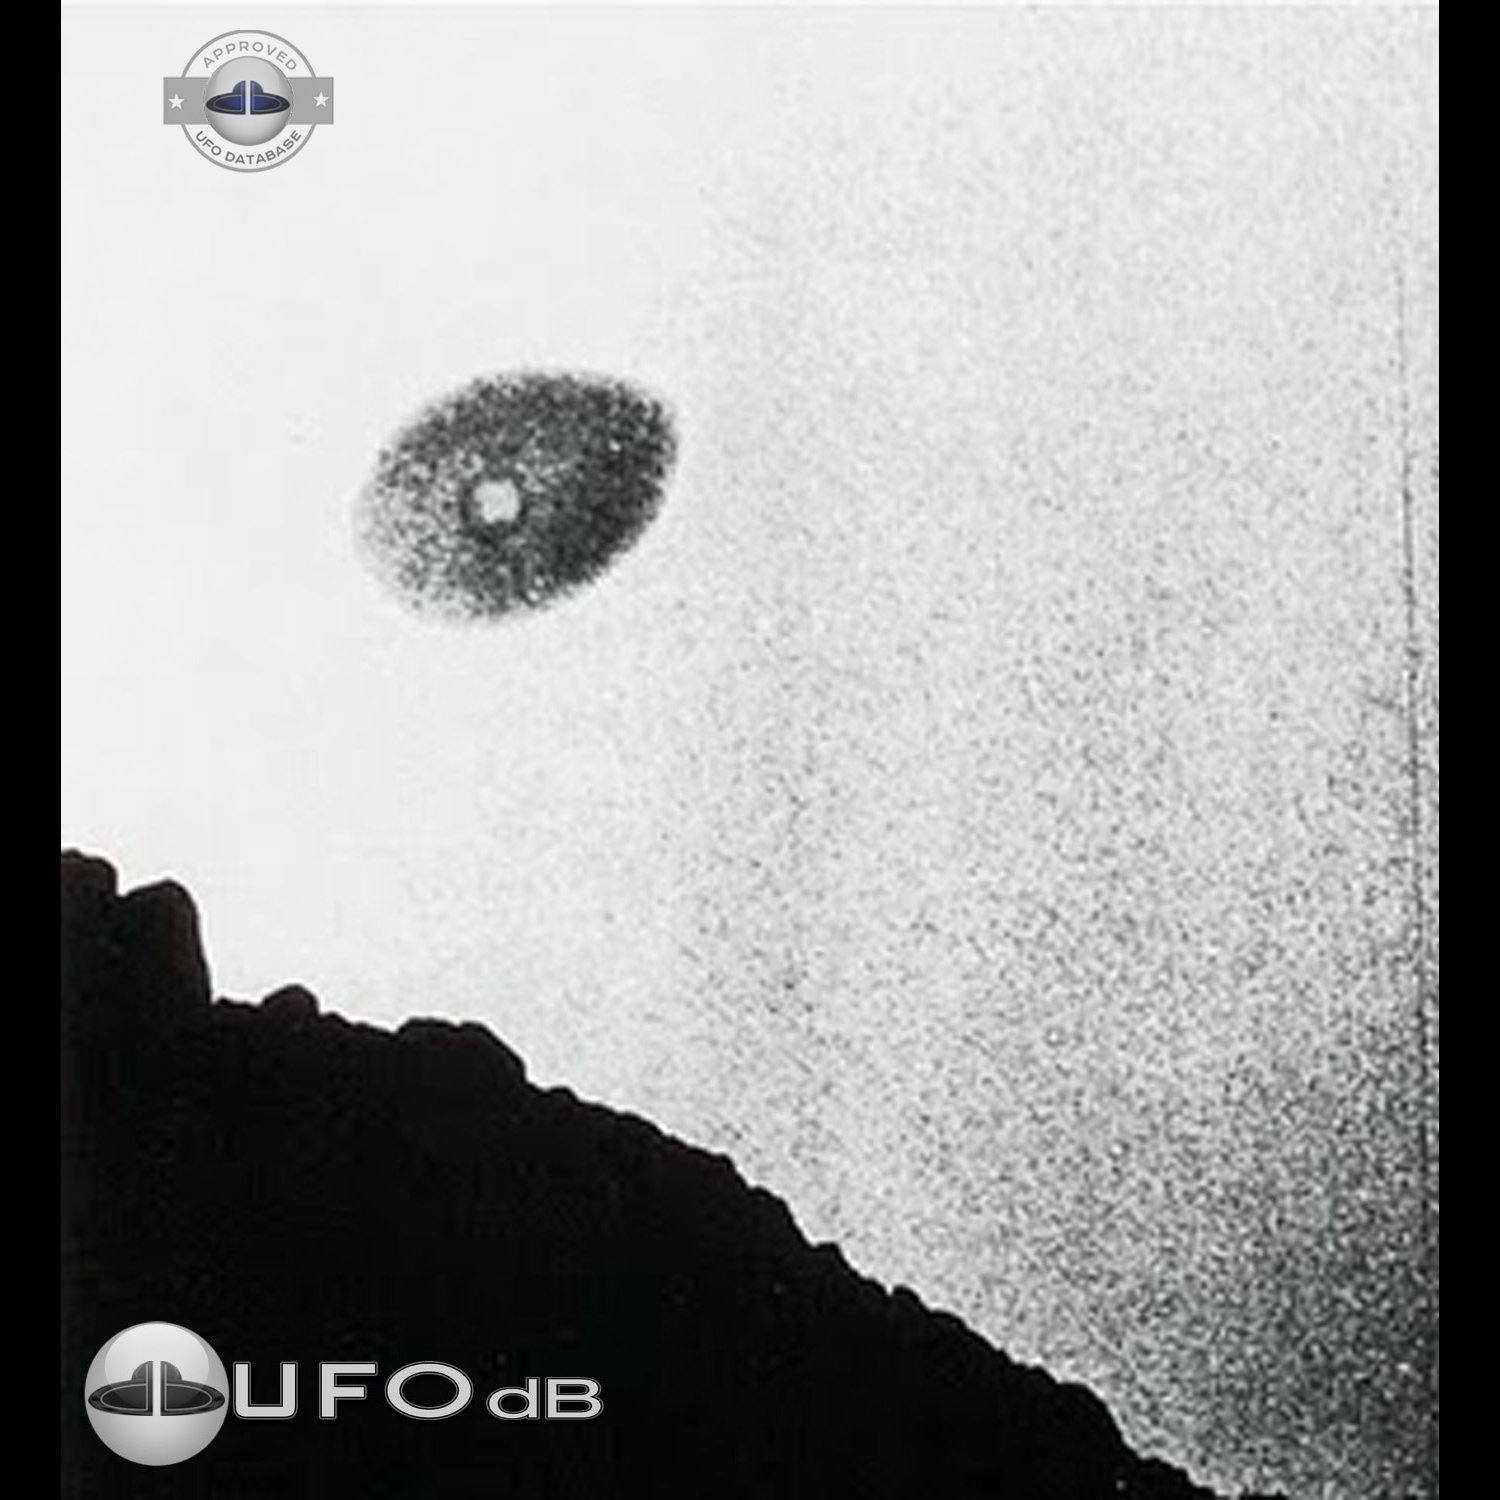 UFO was photograph in the early lights of dawn on May 17 1958 USA UFO Picture #127-1